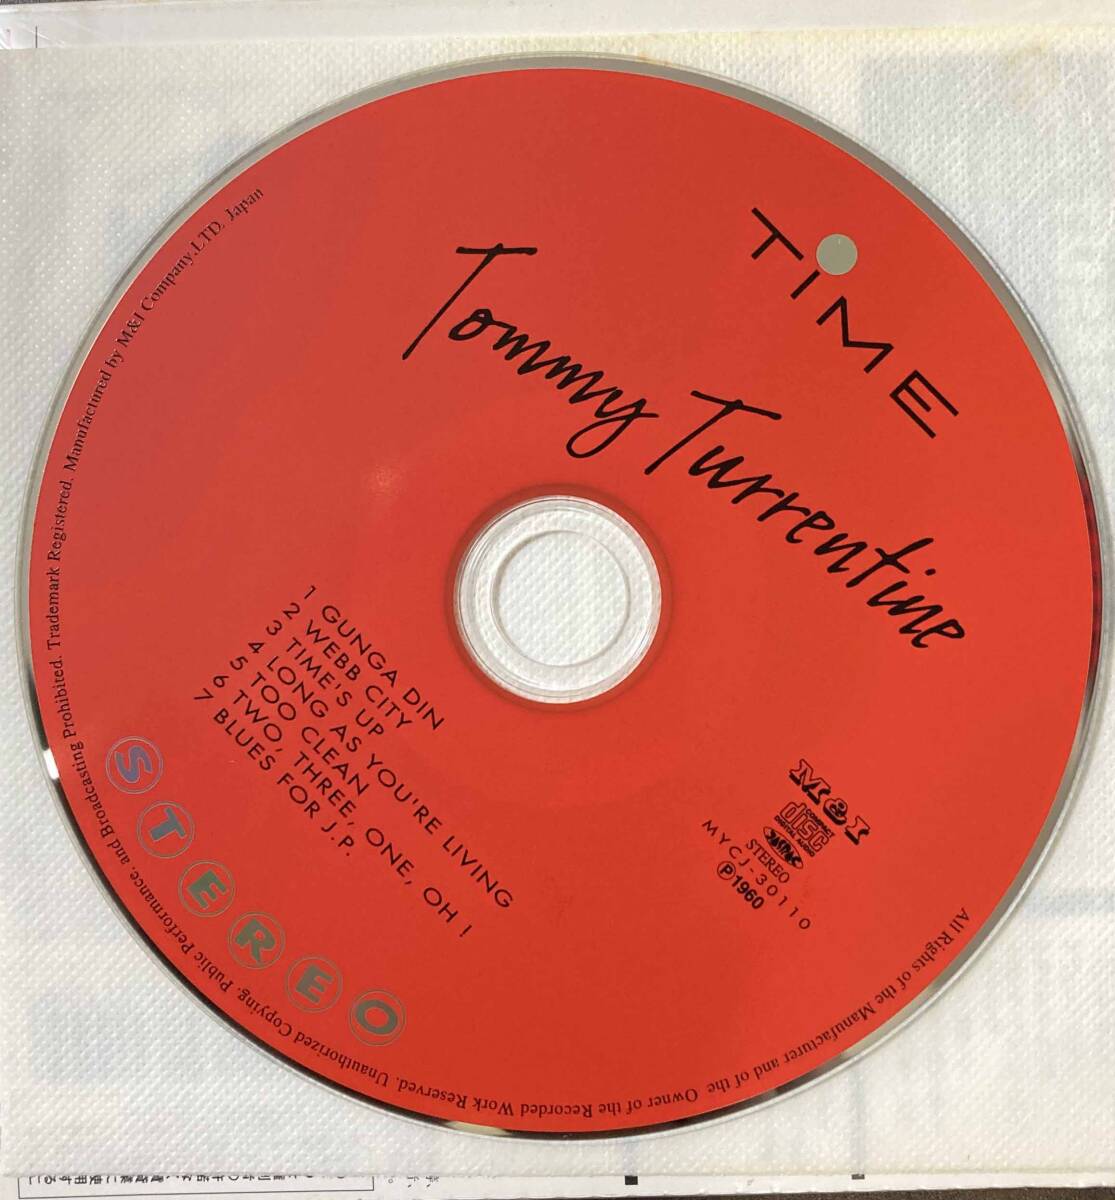 Tommy Turrentine / Tommy Turrentine 中古CD　国内盤　帯付き 紙ジャケ　リマスタリング _画像3